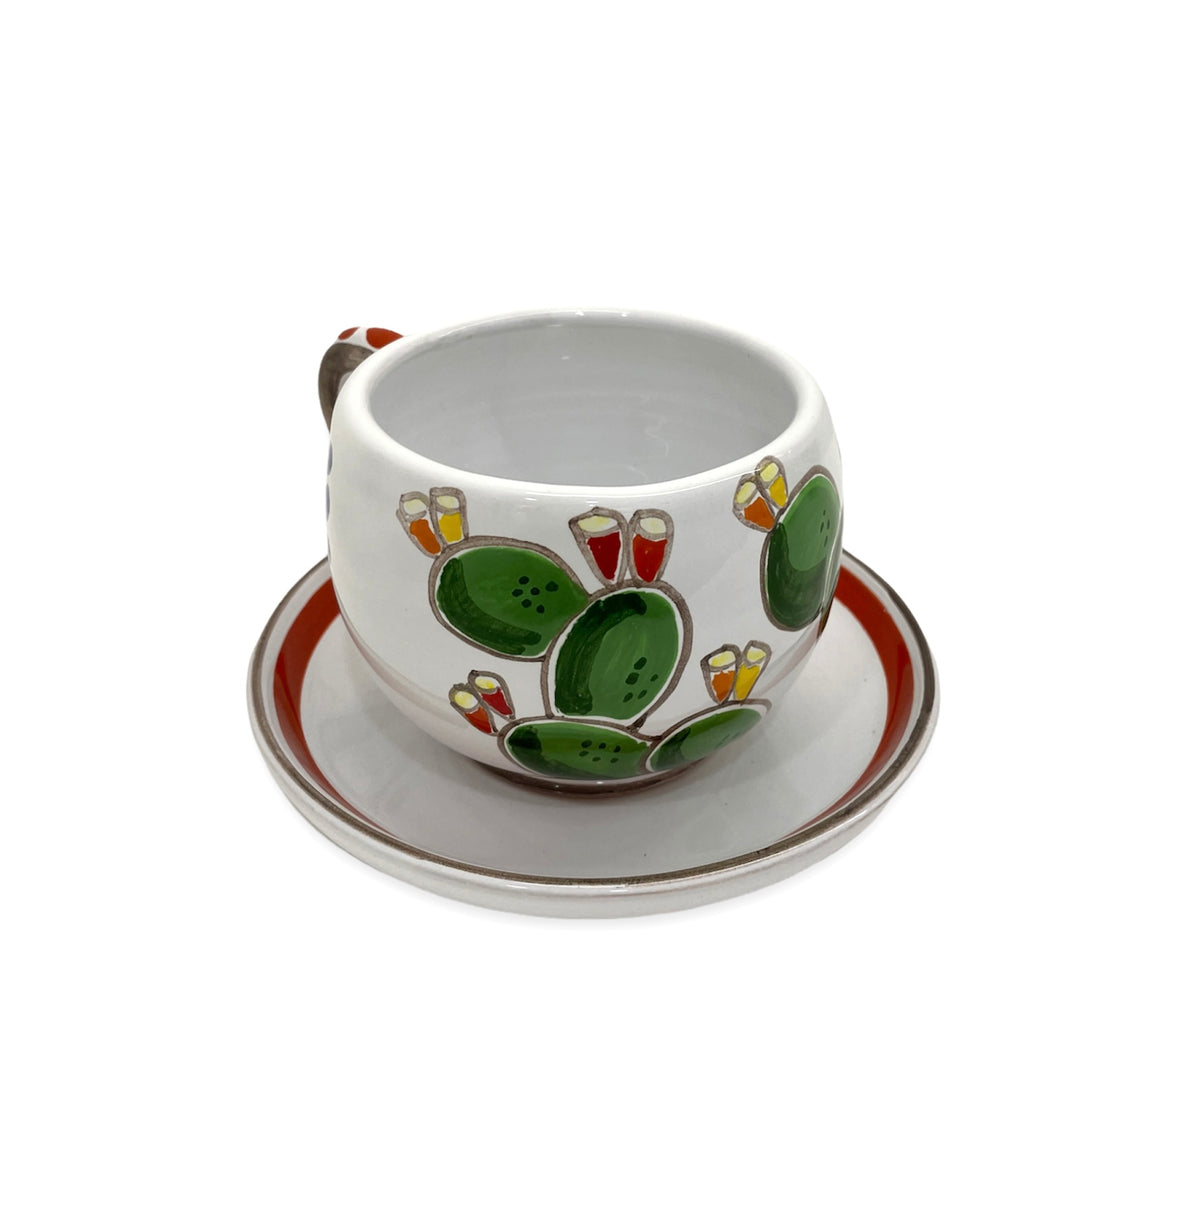 Prickly pears cup and saucer